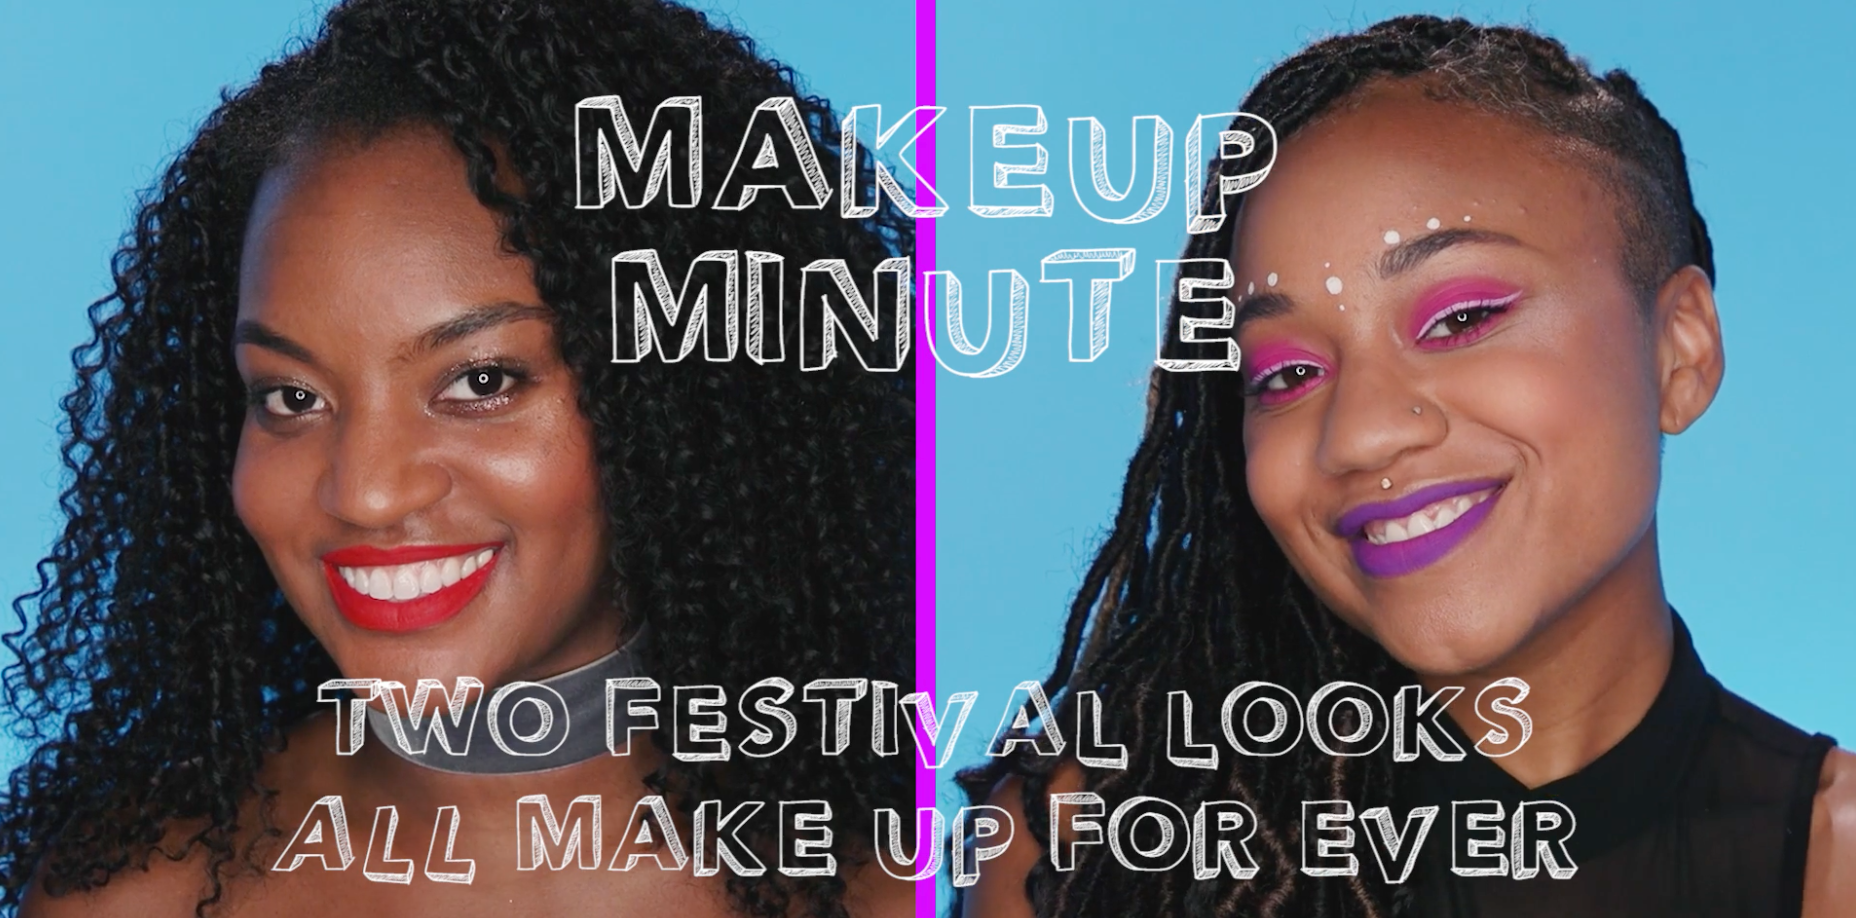 We Created Two Festival Makeup Looks So You Don't Have To
